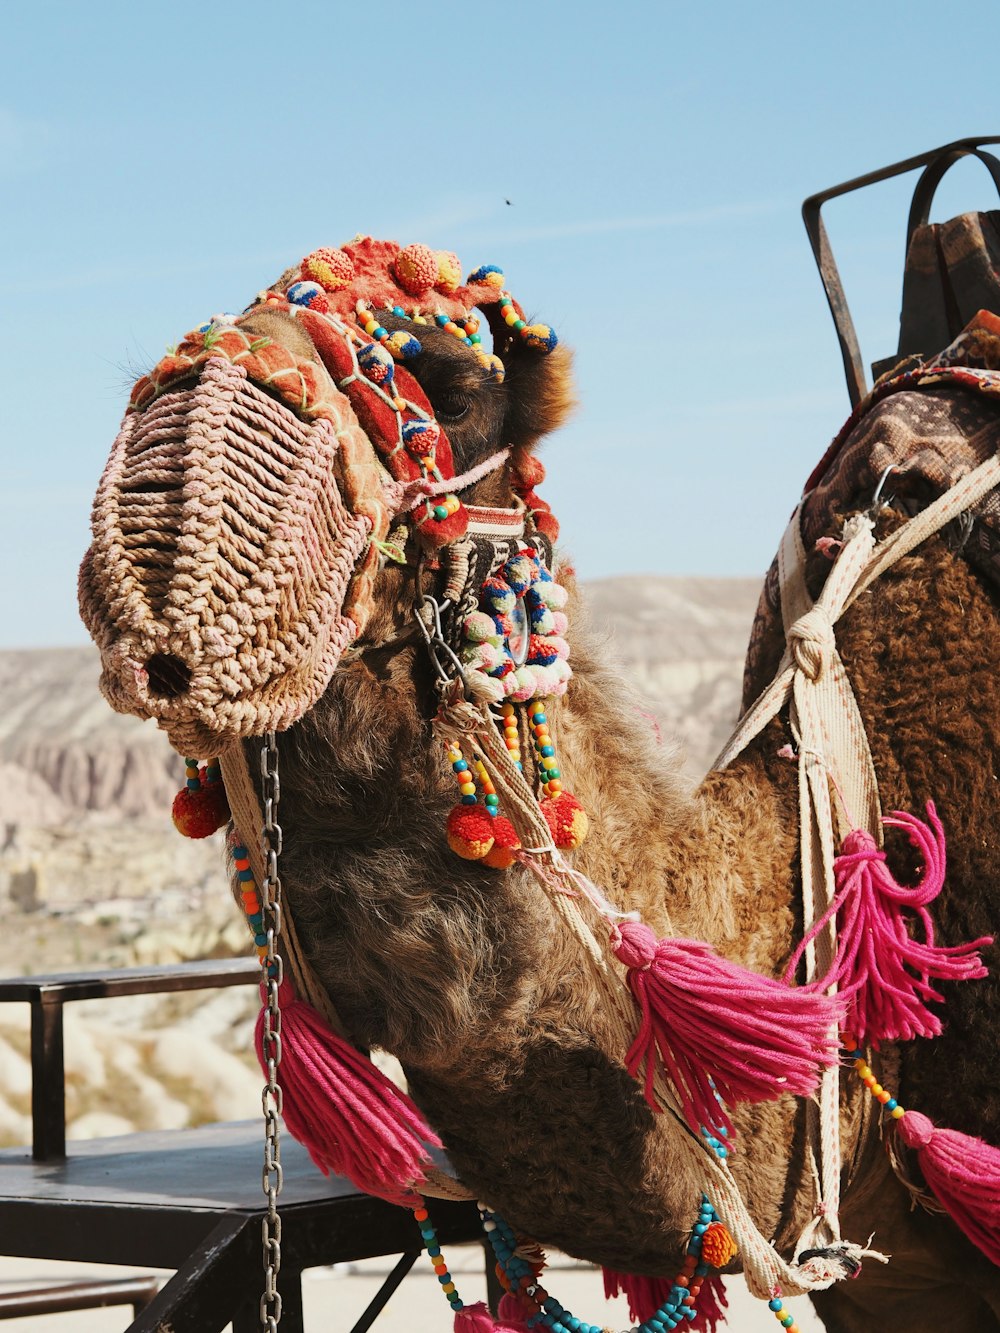 a close up of a camel with a saddle on its back